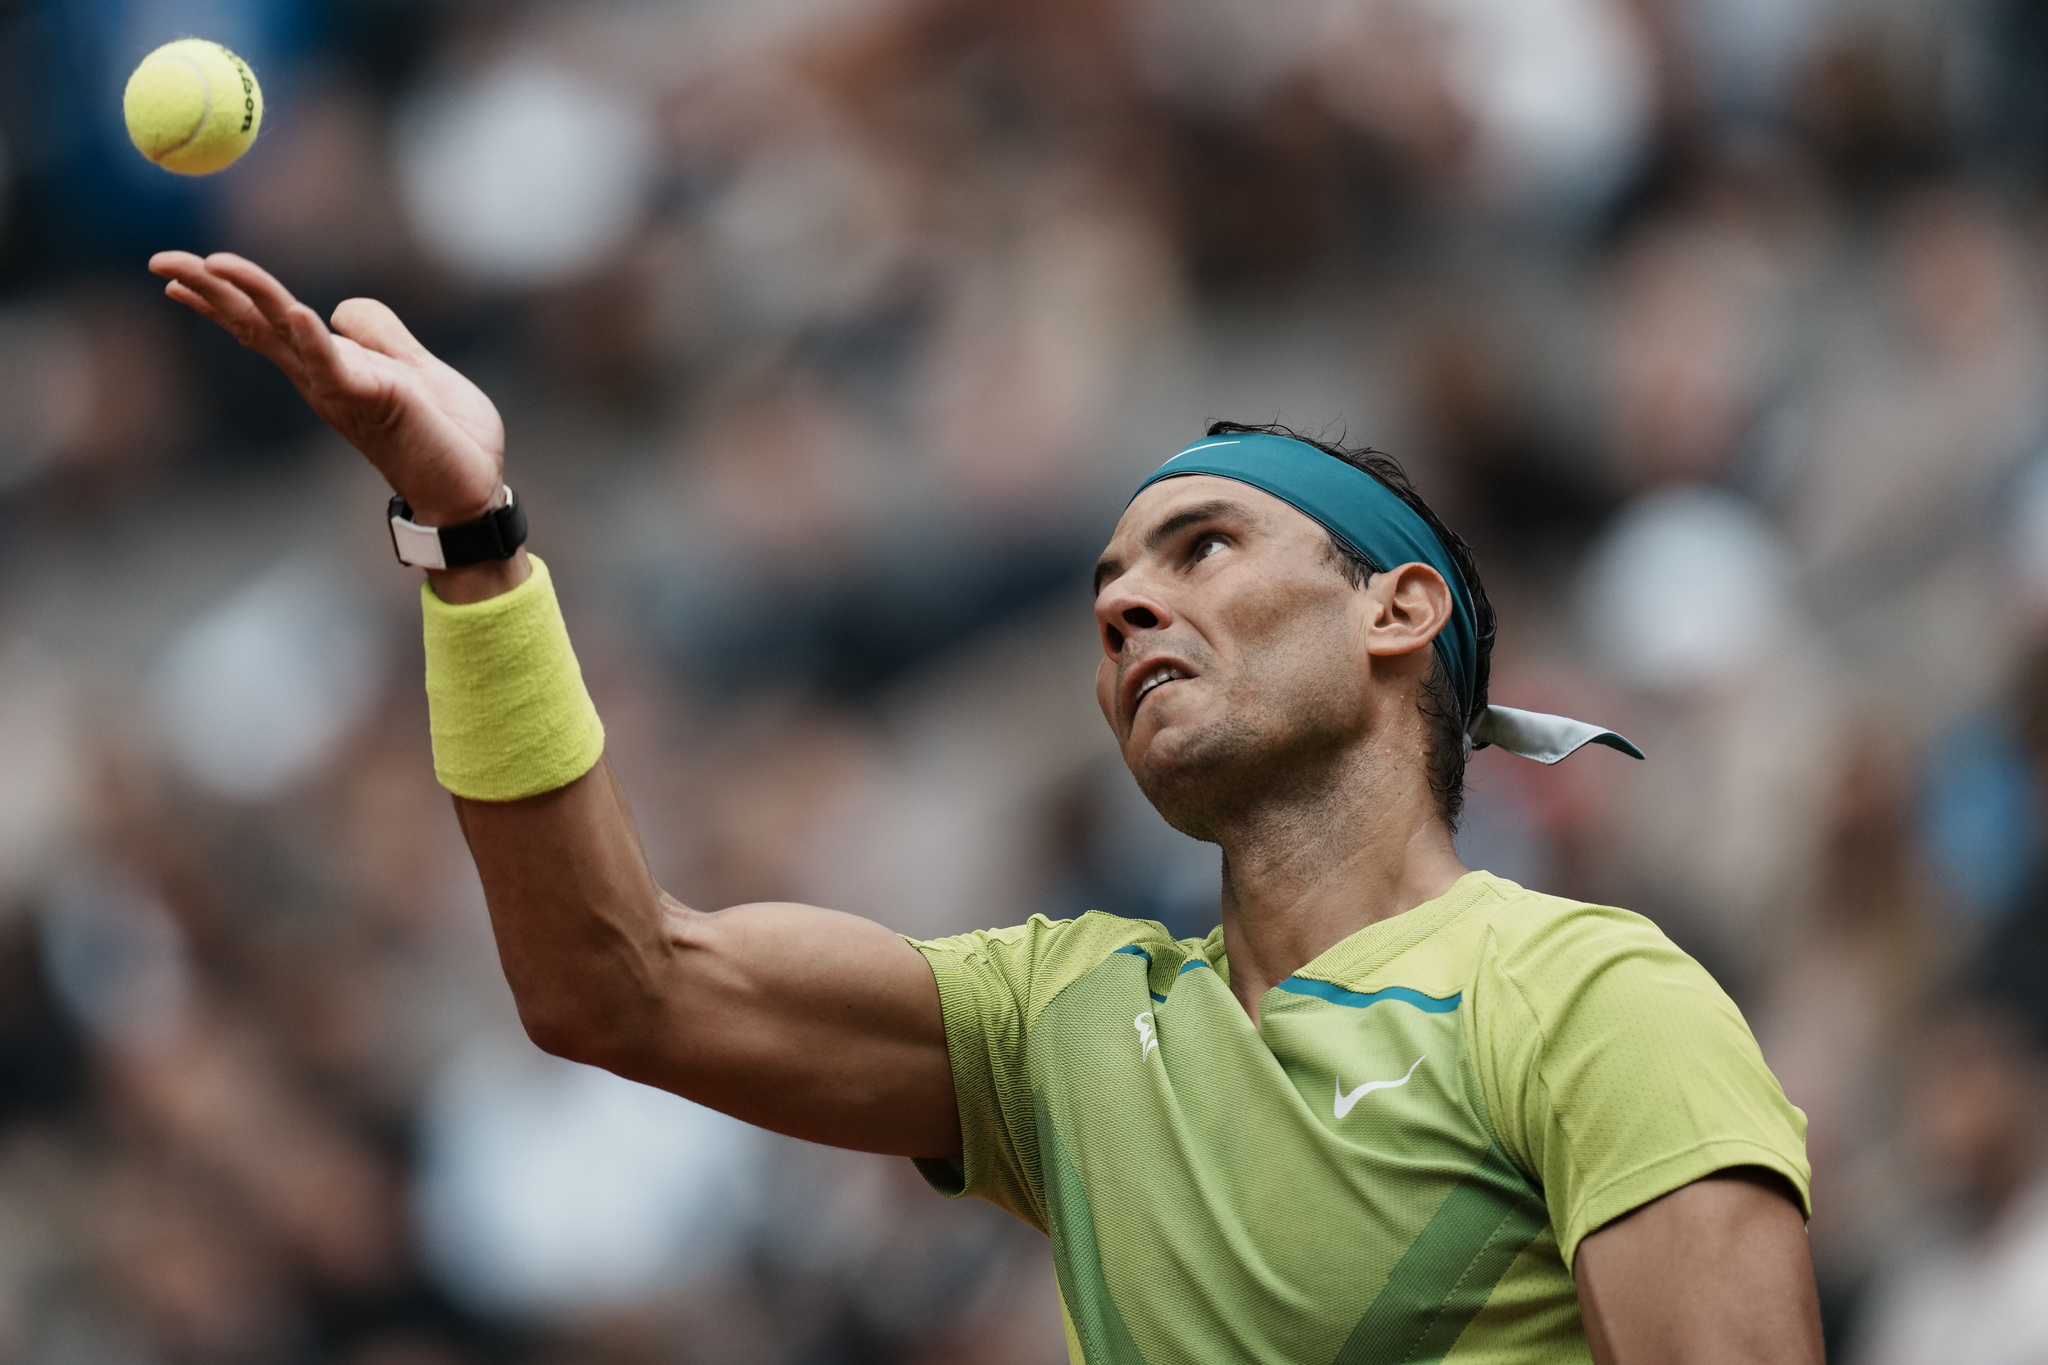 Spain's Rafael  lt;HIT gt;Nadal lt;/HIT gt; serves against Australia's Jordan Thompson during their first round match at the French Open tennis tournament in Roland Garros stadium in Paris, France, Monday, May 23, 2022. (AP Photo/Thibault Camus)